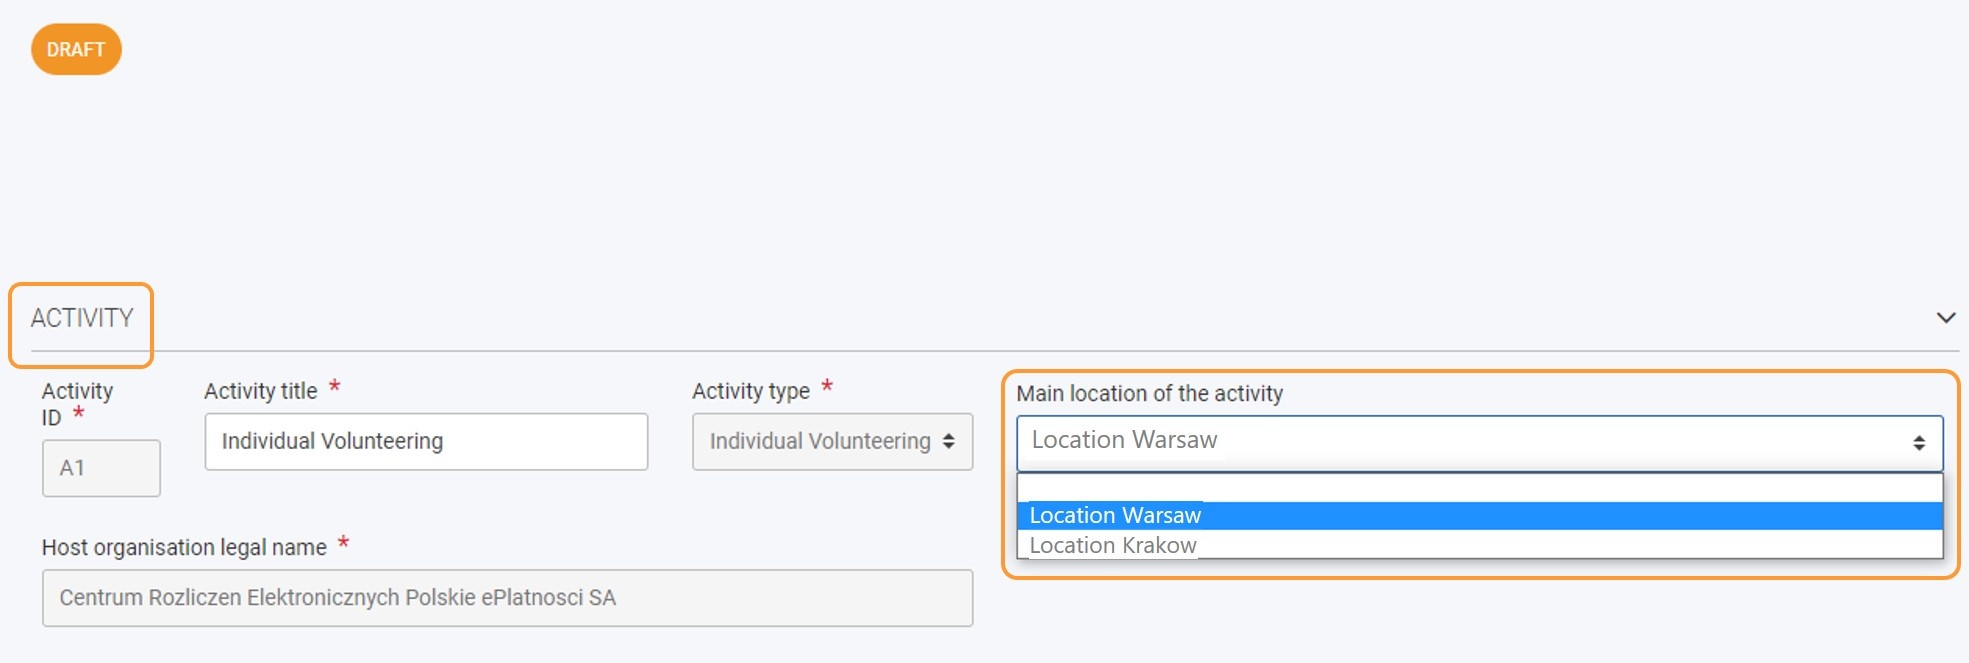 Example of Activity section